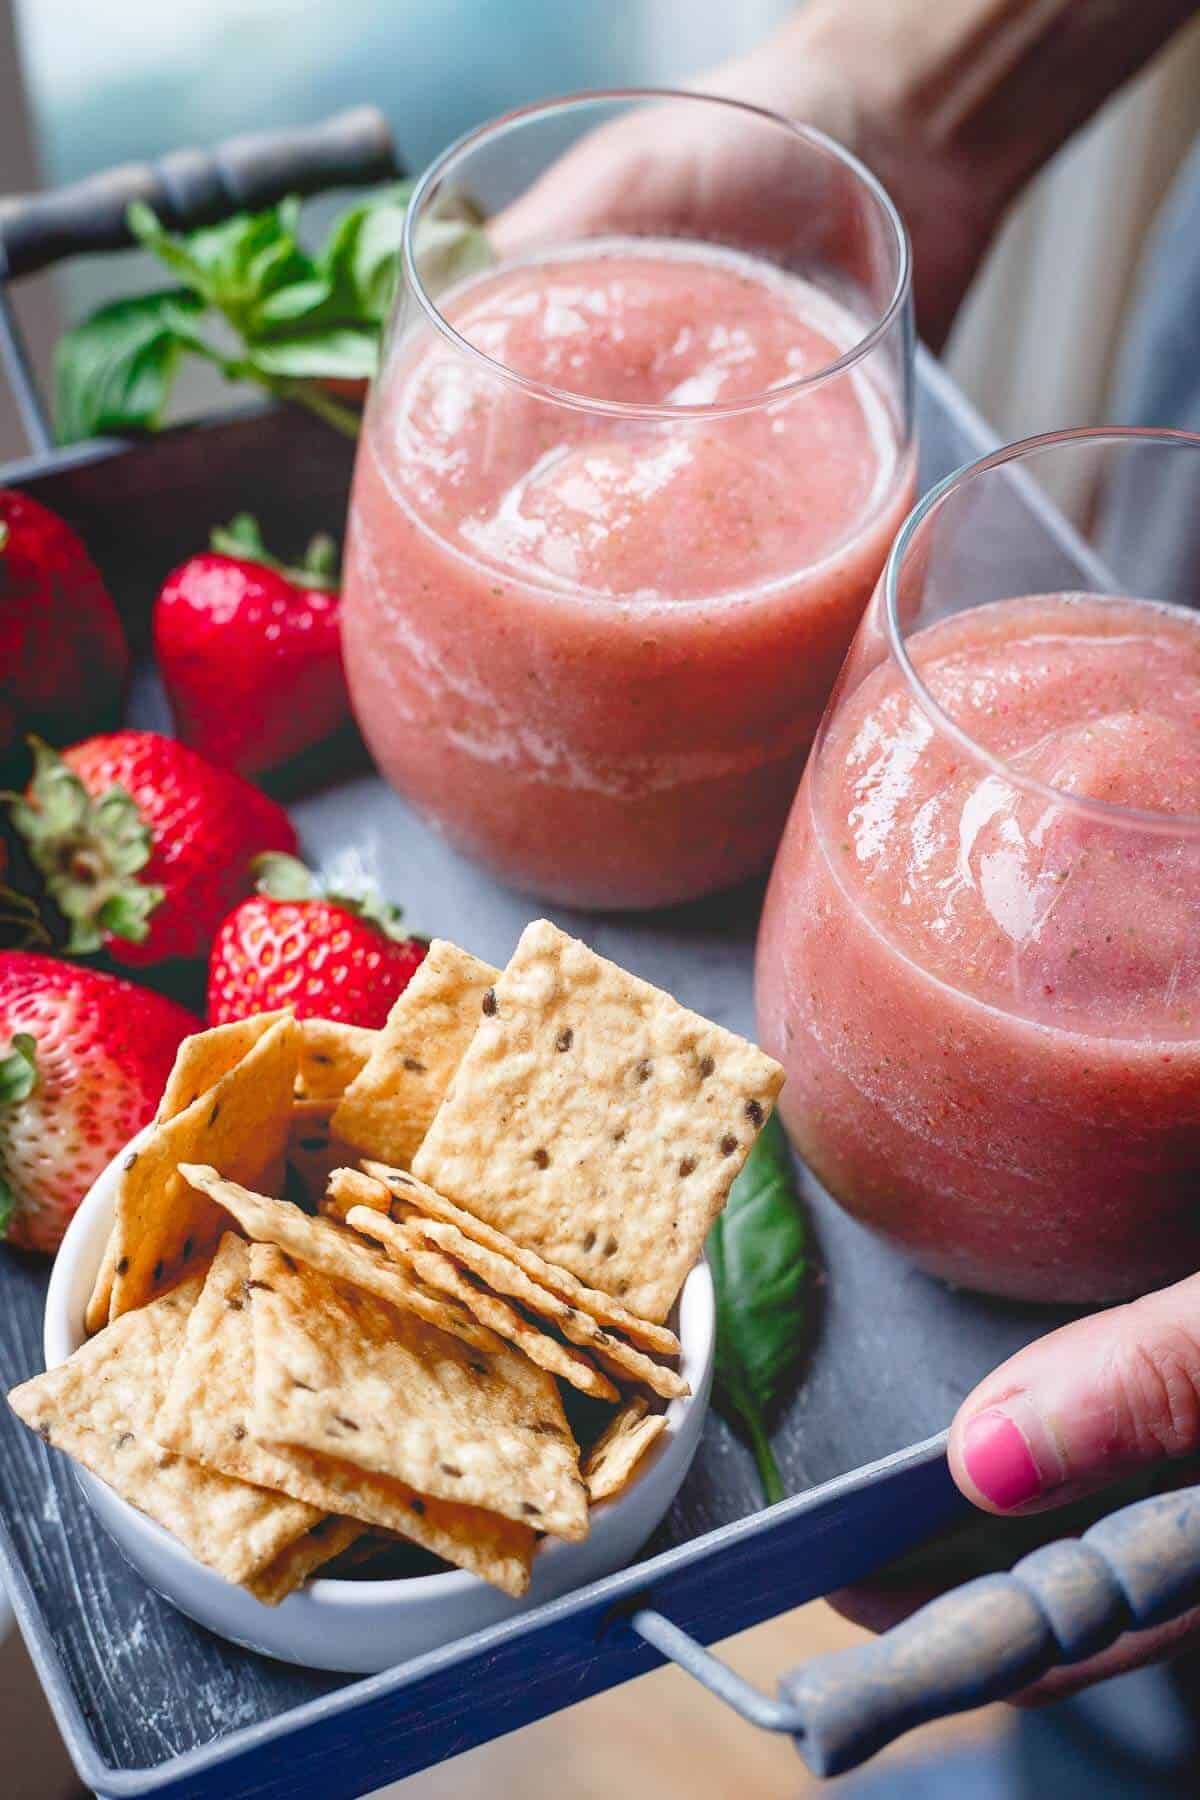 These strawberry basil cider slushies are the perfect refreshing summer drink. Just 3 ingredients and your blender for the happiest of happy hours!